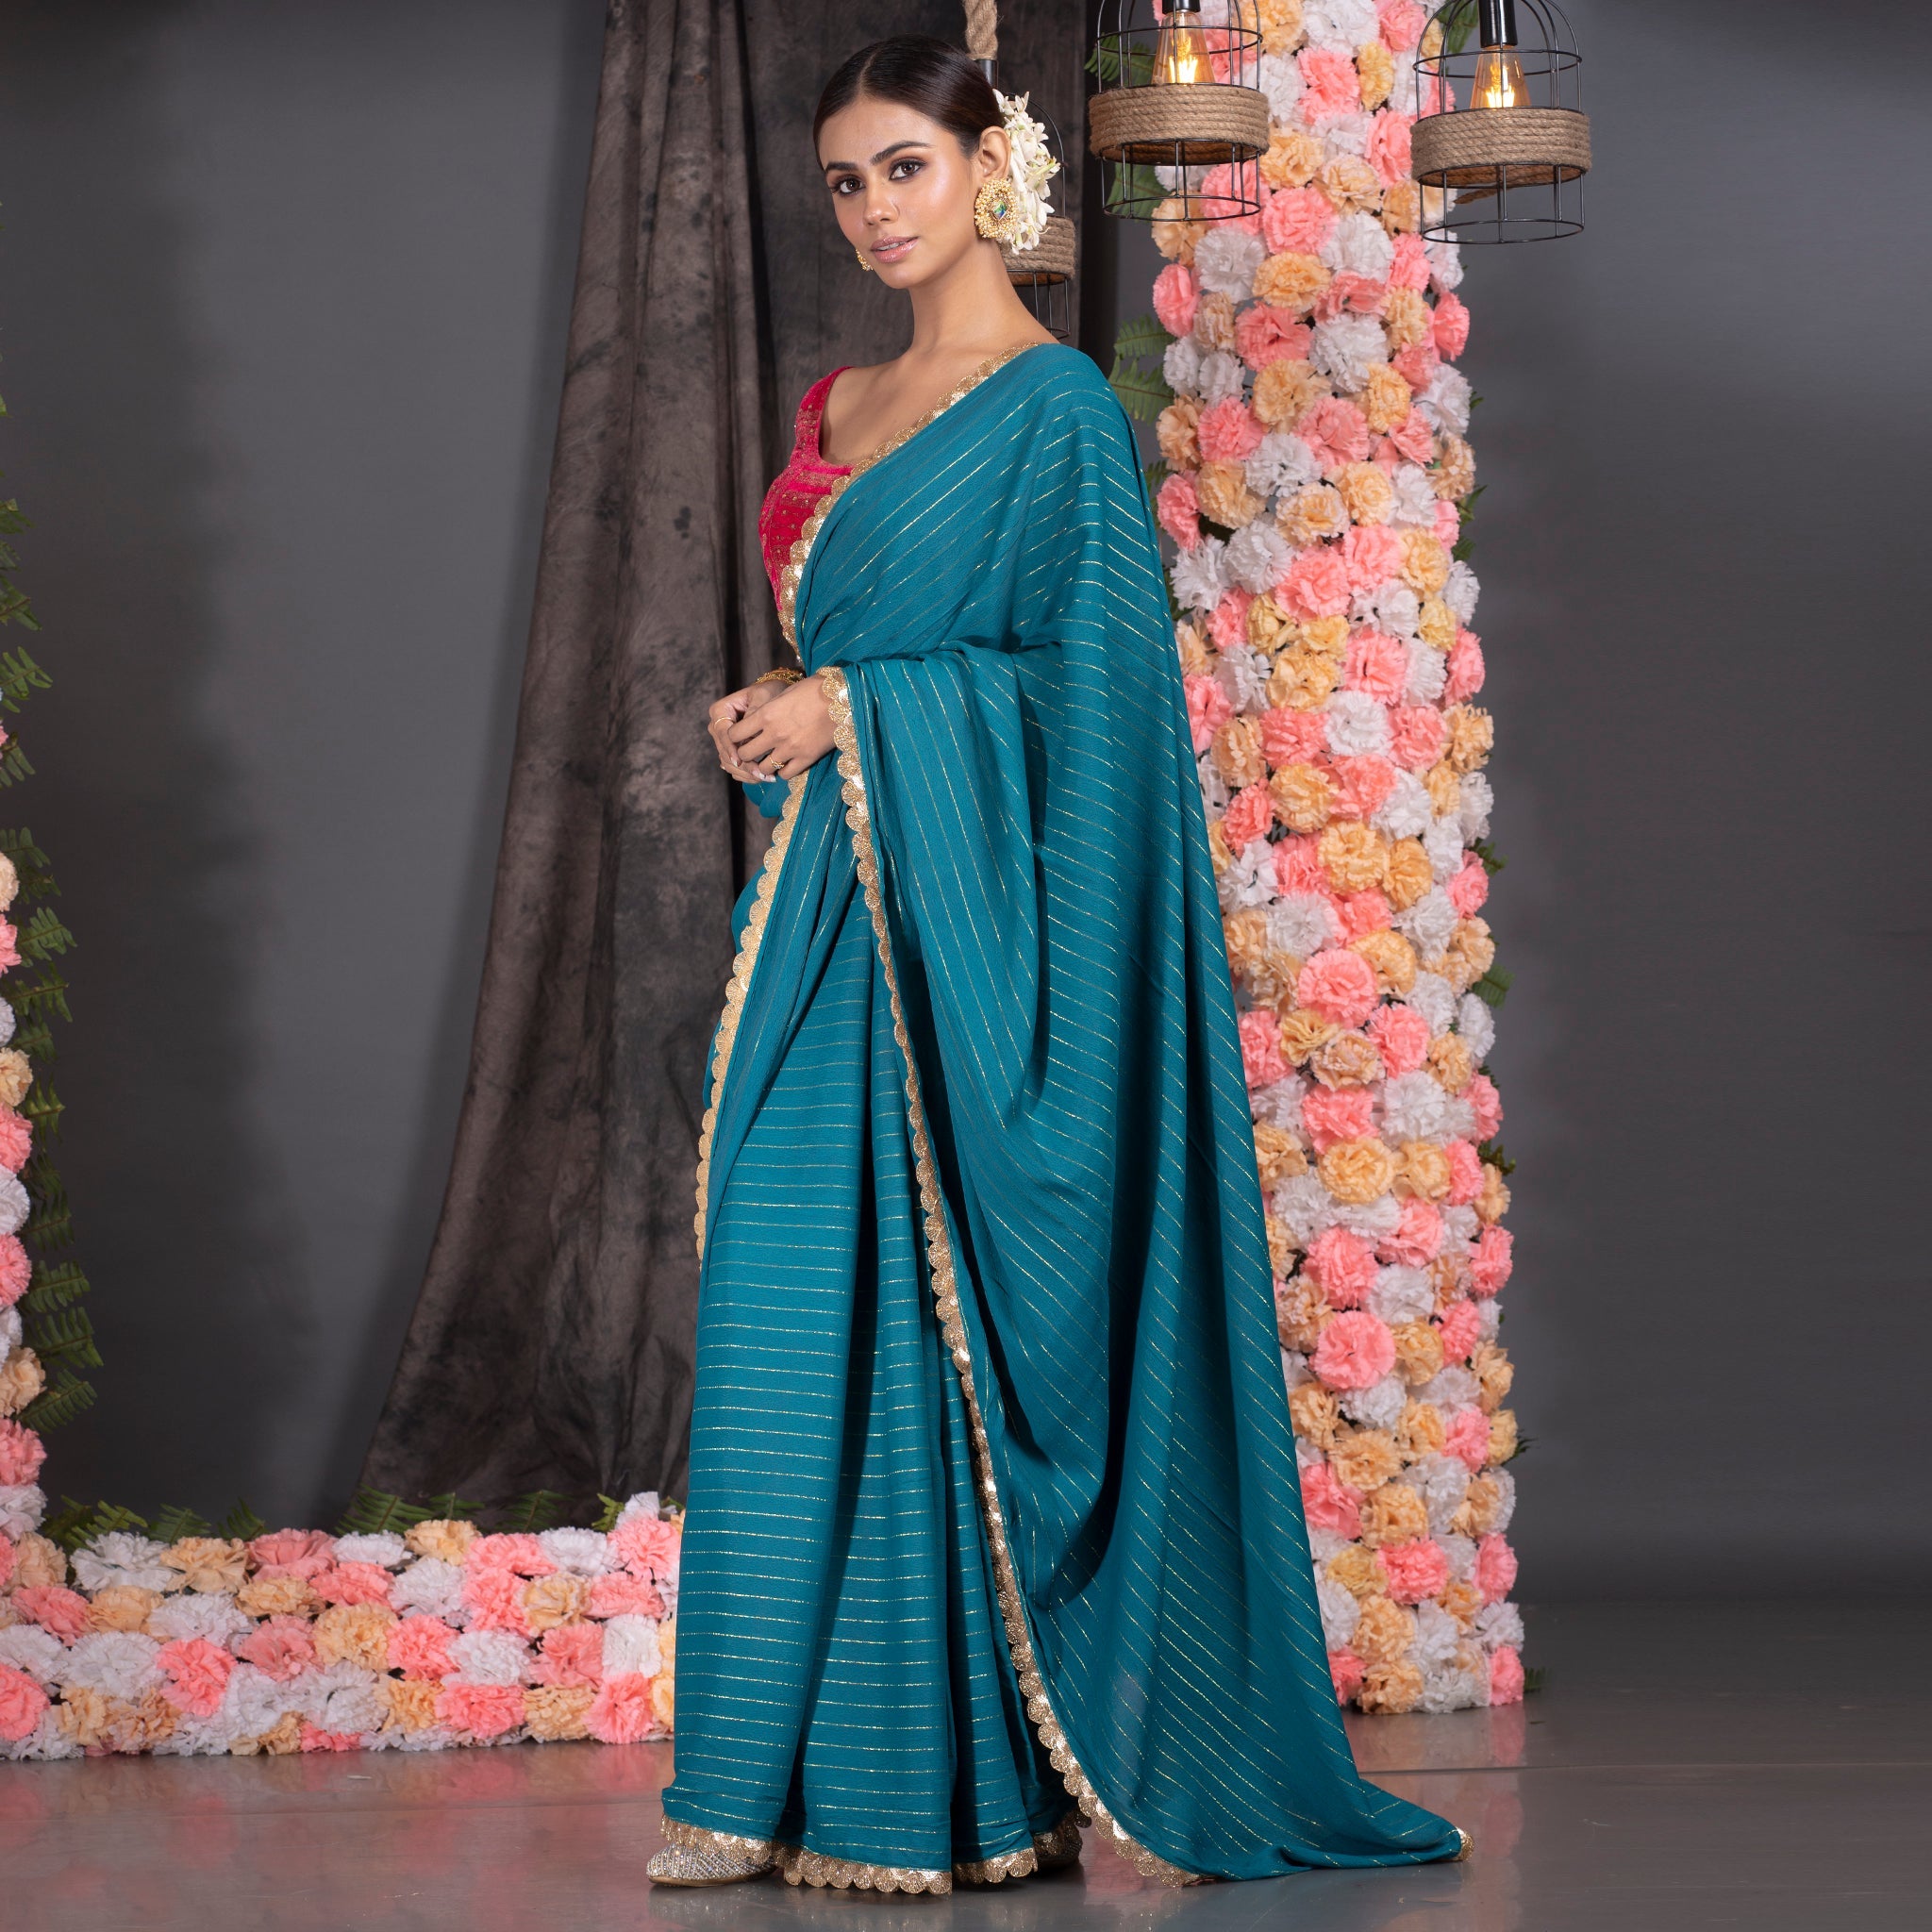 Women's Teal Blue Georgette Saree With Lurex Gold Stripes And Scallop Embroidered Border - Boveee